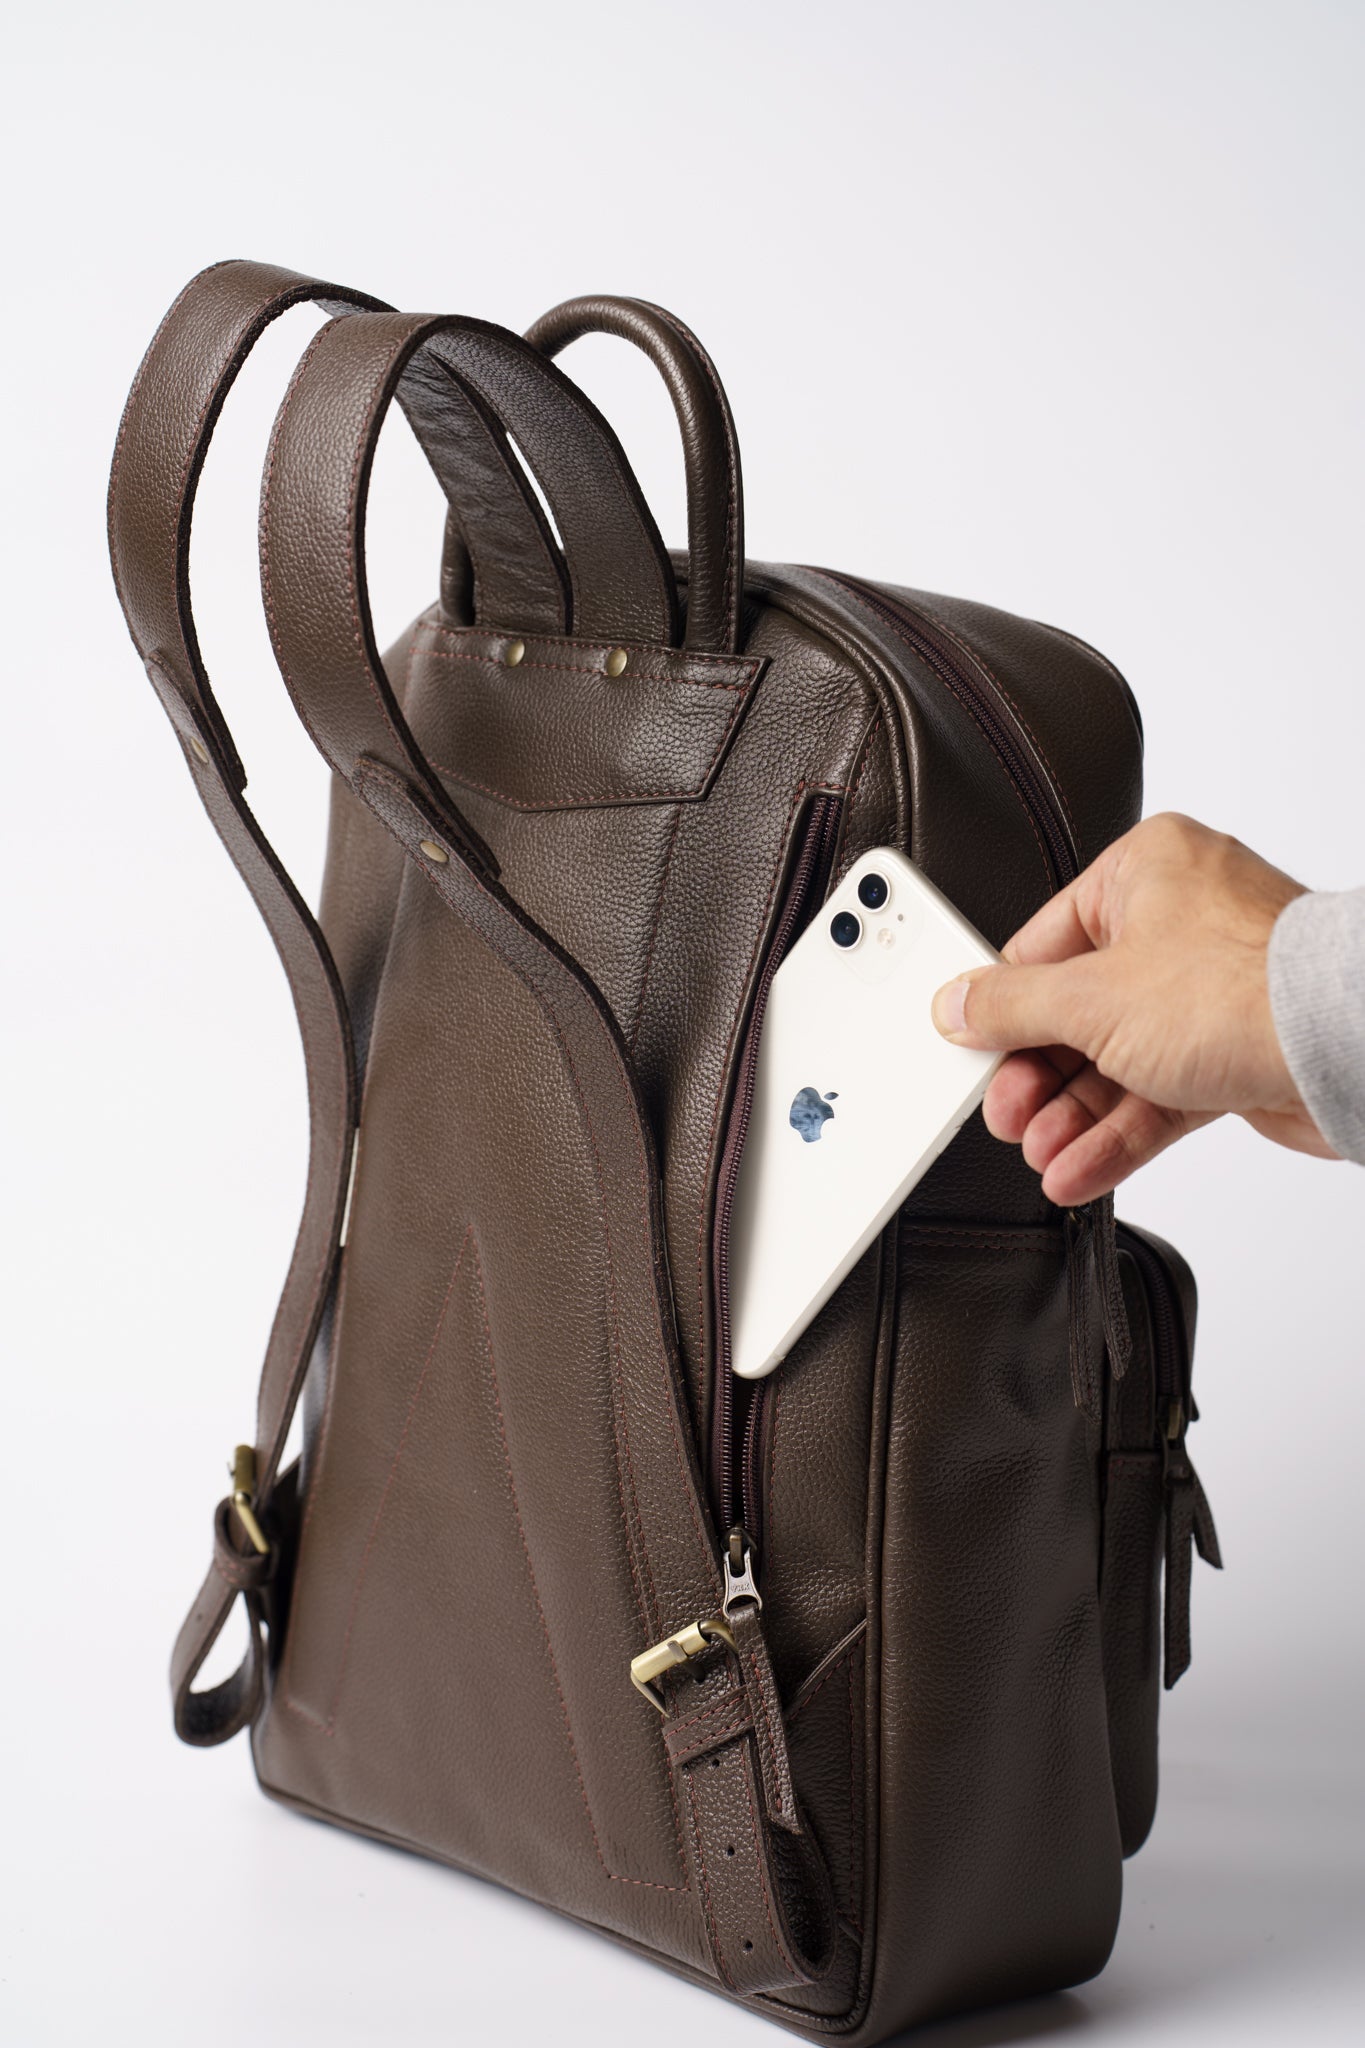 Rear view of Chamra's chocolate brown leather bag, showcasing a sleek compartment for phones behind the shoulder straps. 